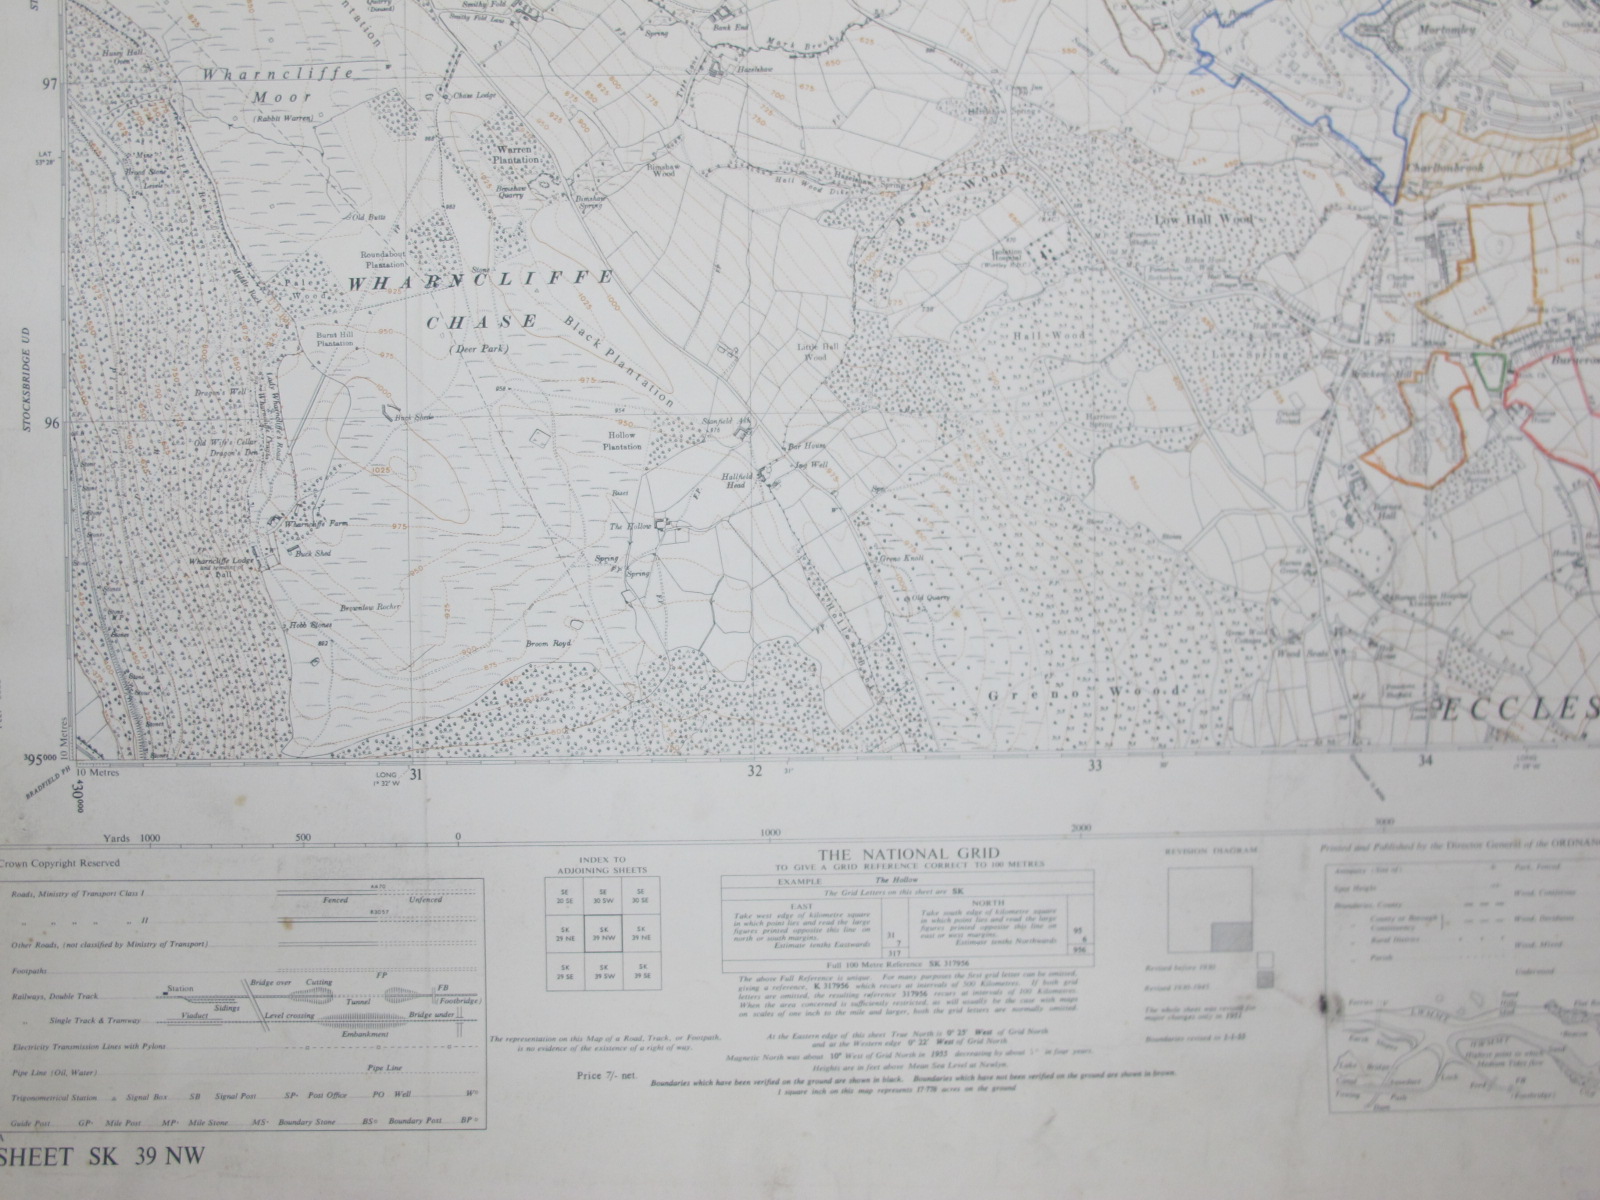 West Riding Yorkshire Maps, Rotherham and area, some dates noted - 1889, 1903, 1959, 1960, various - Image 7 of 10